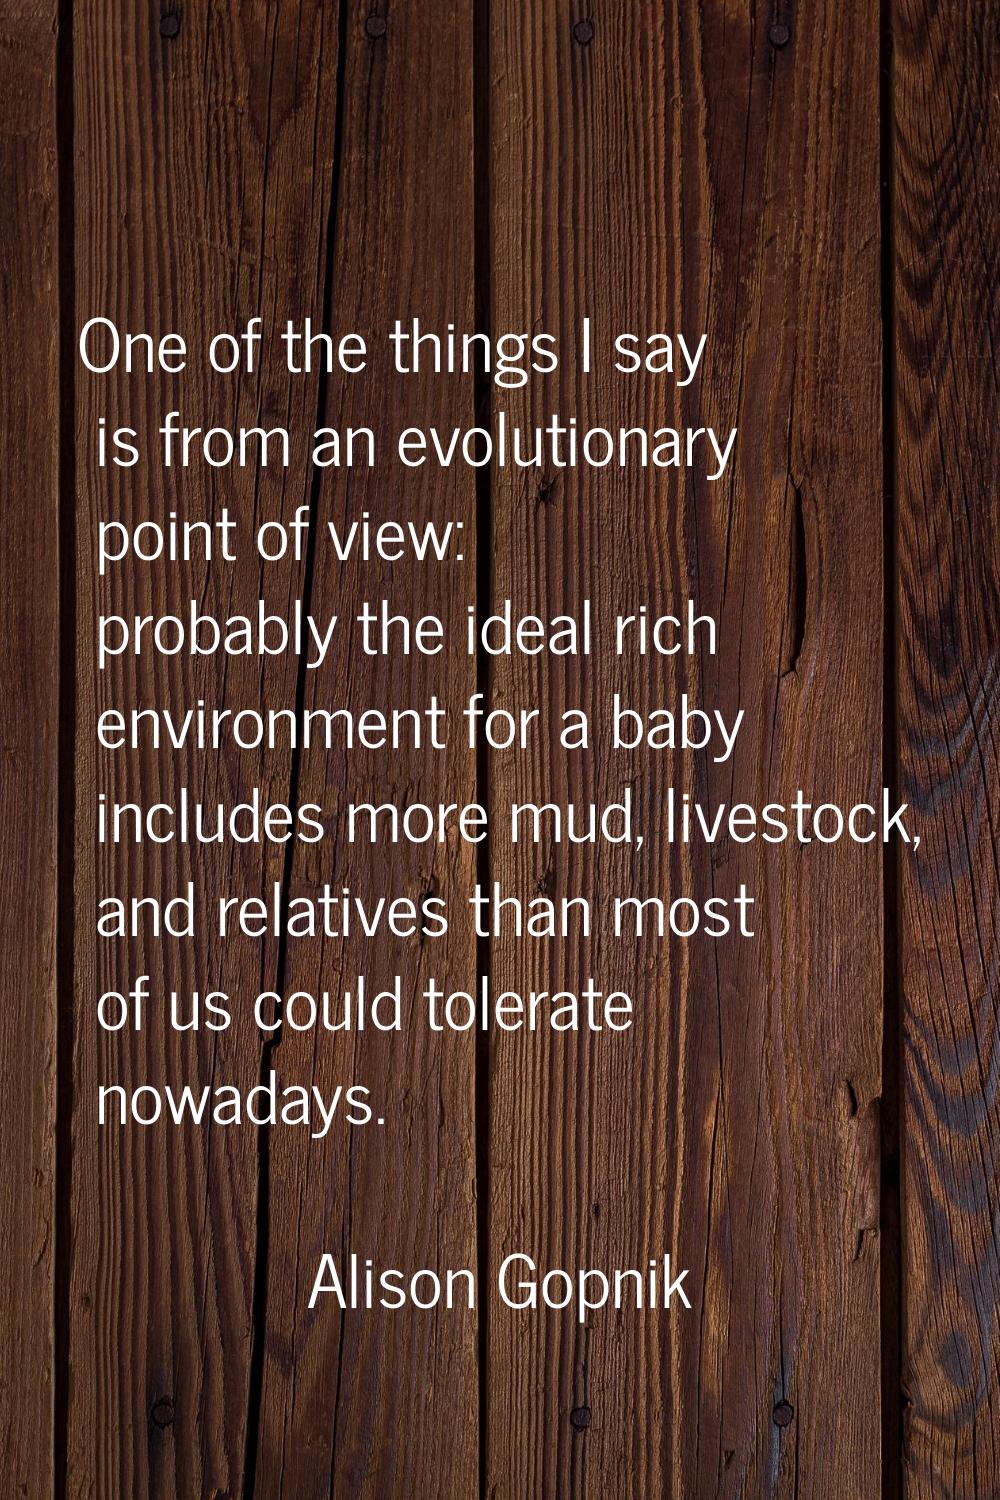 One of the things I say is from an evolutionary point of view: probably the ideal rich environment 